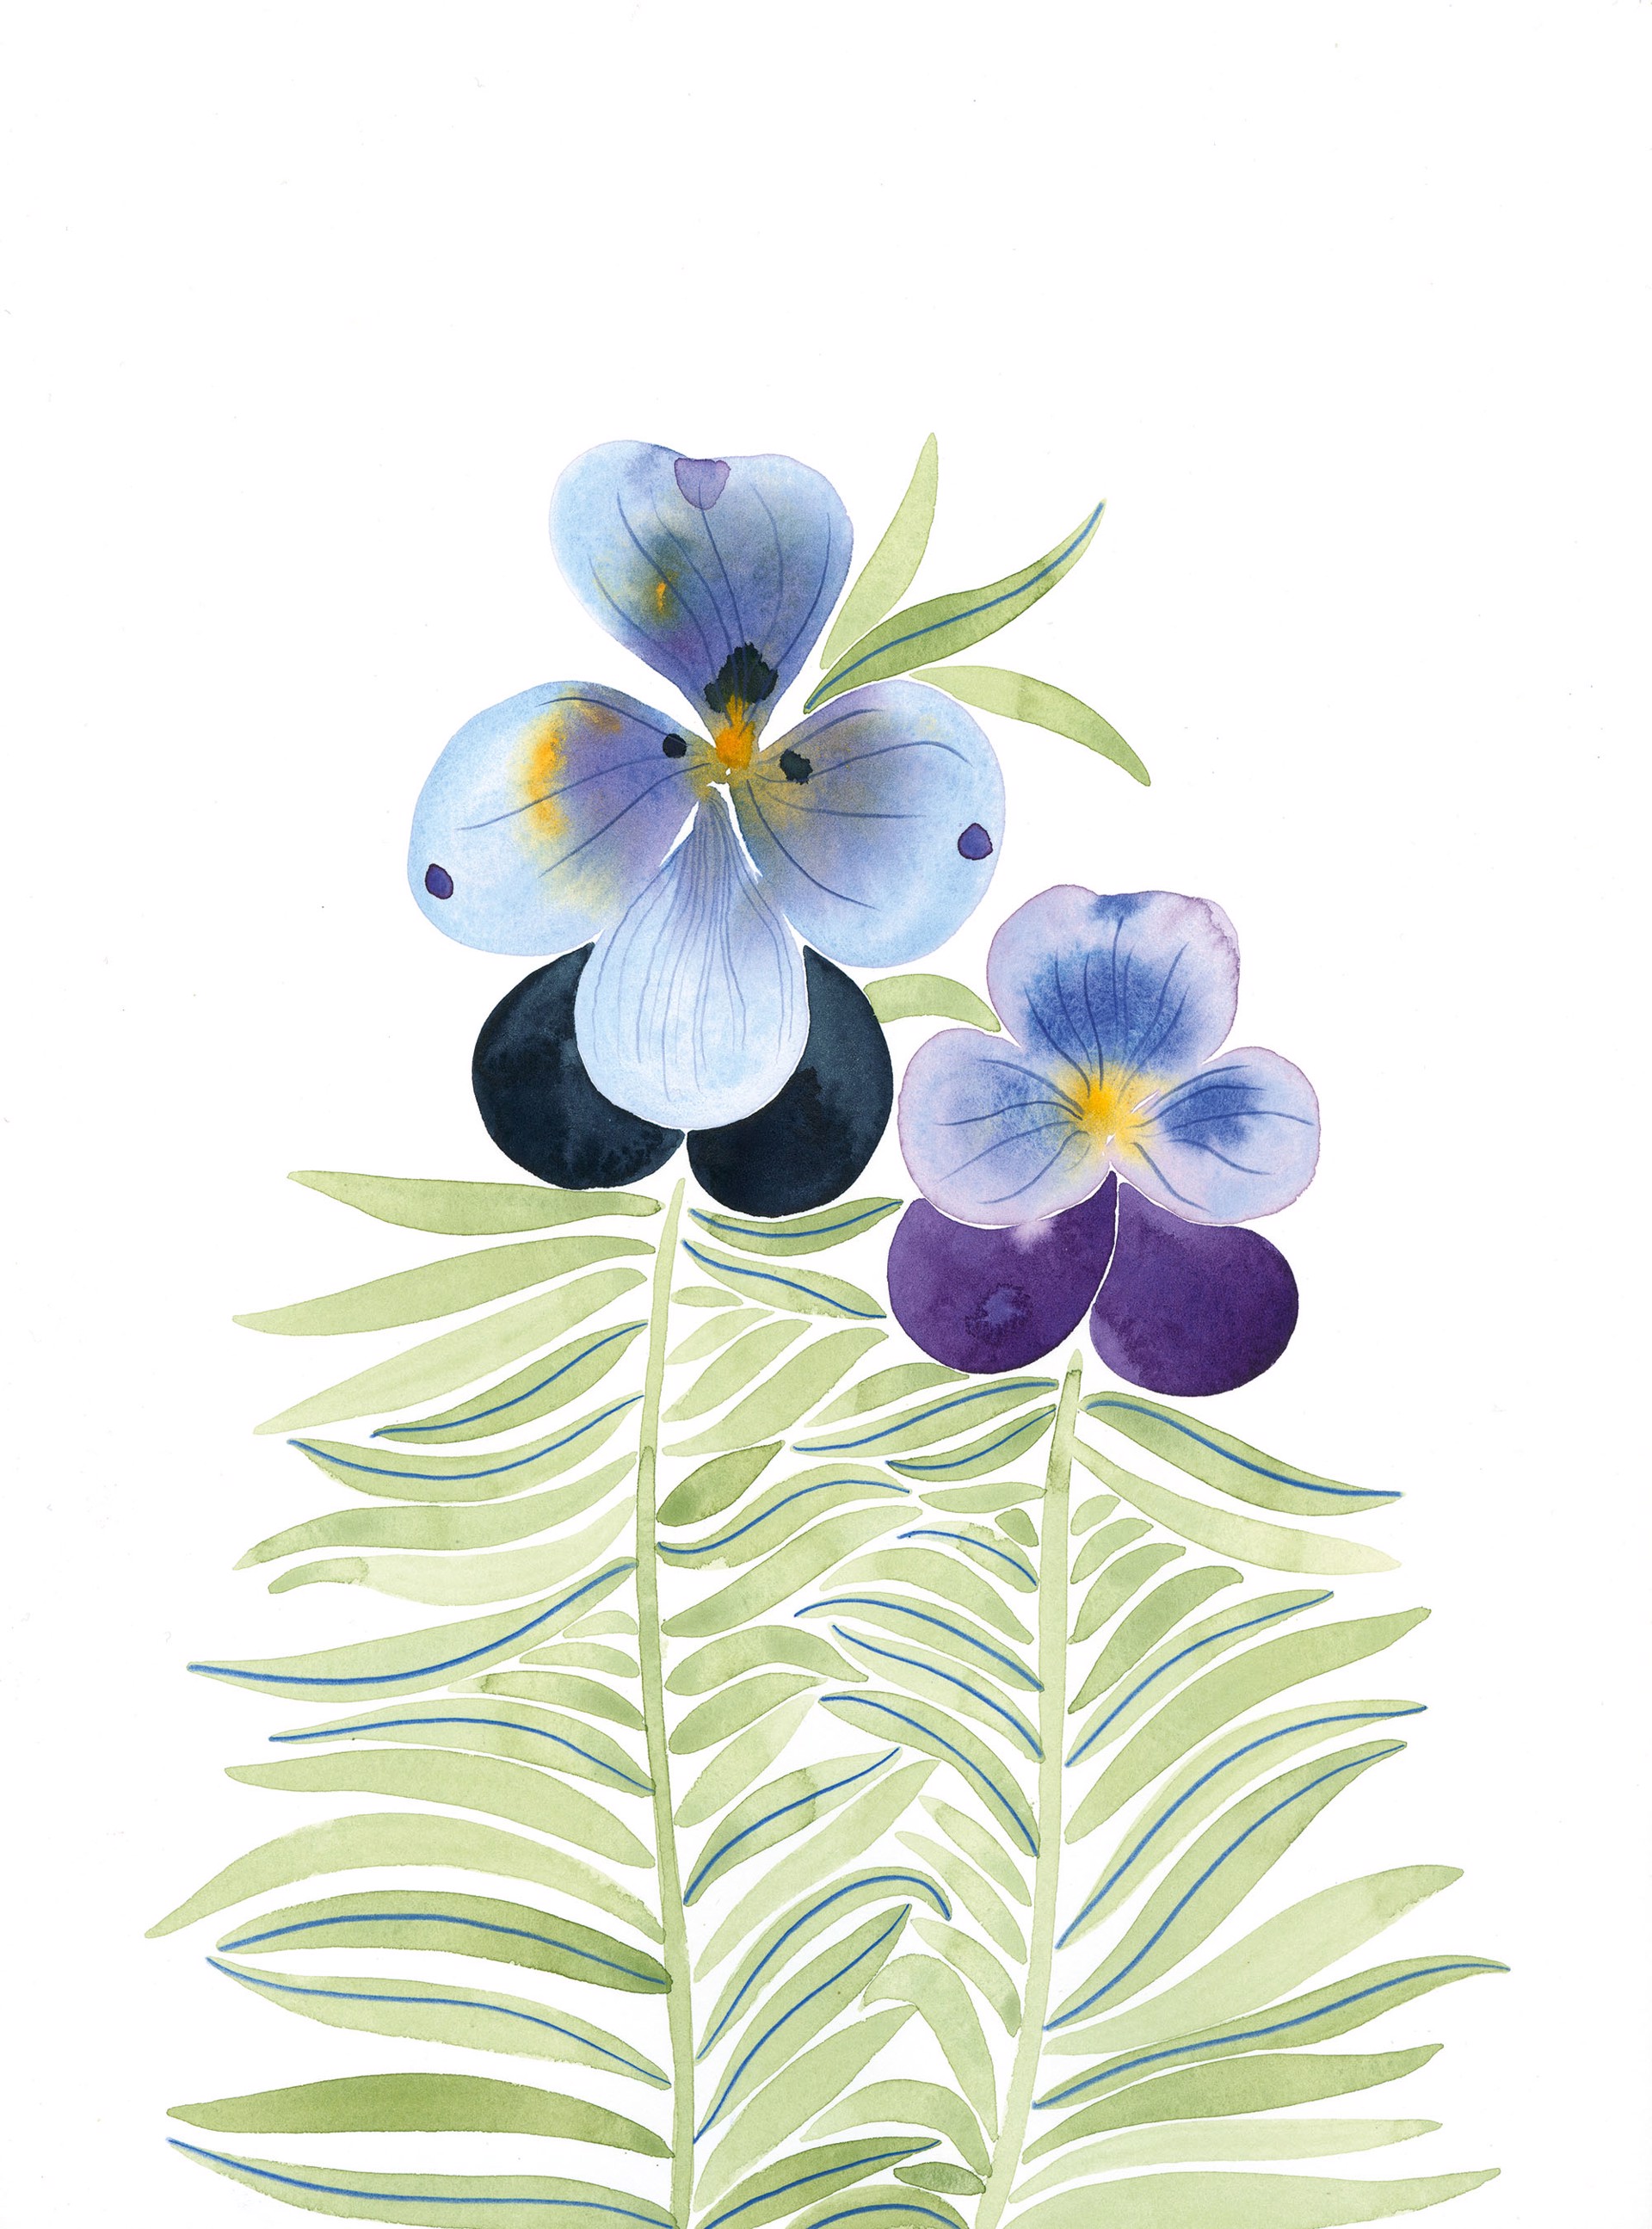 Turquoise Pansies by Anine Cecilie Iversen